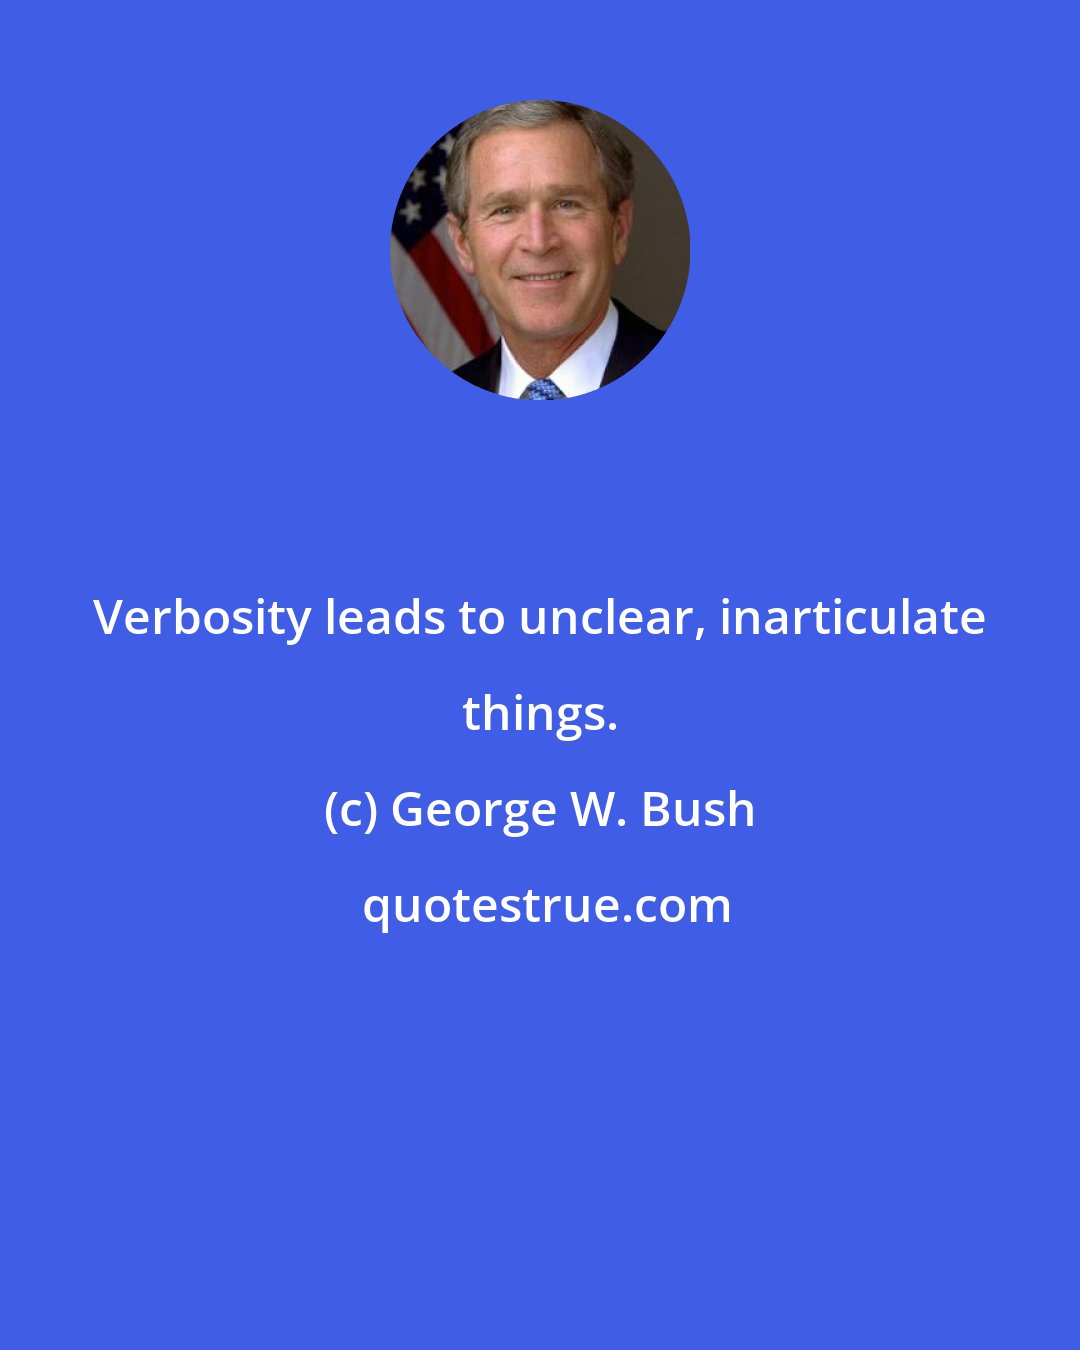 George W. Bush: Verbosity leads to unclear, inarticulate things.